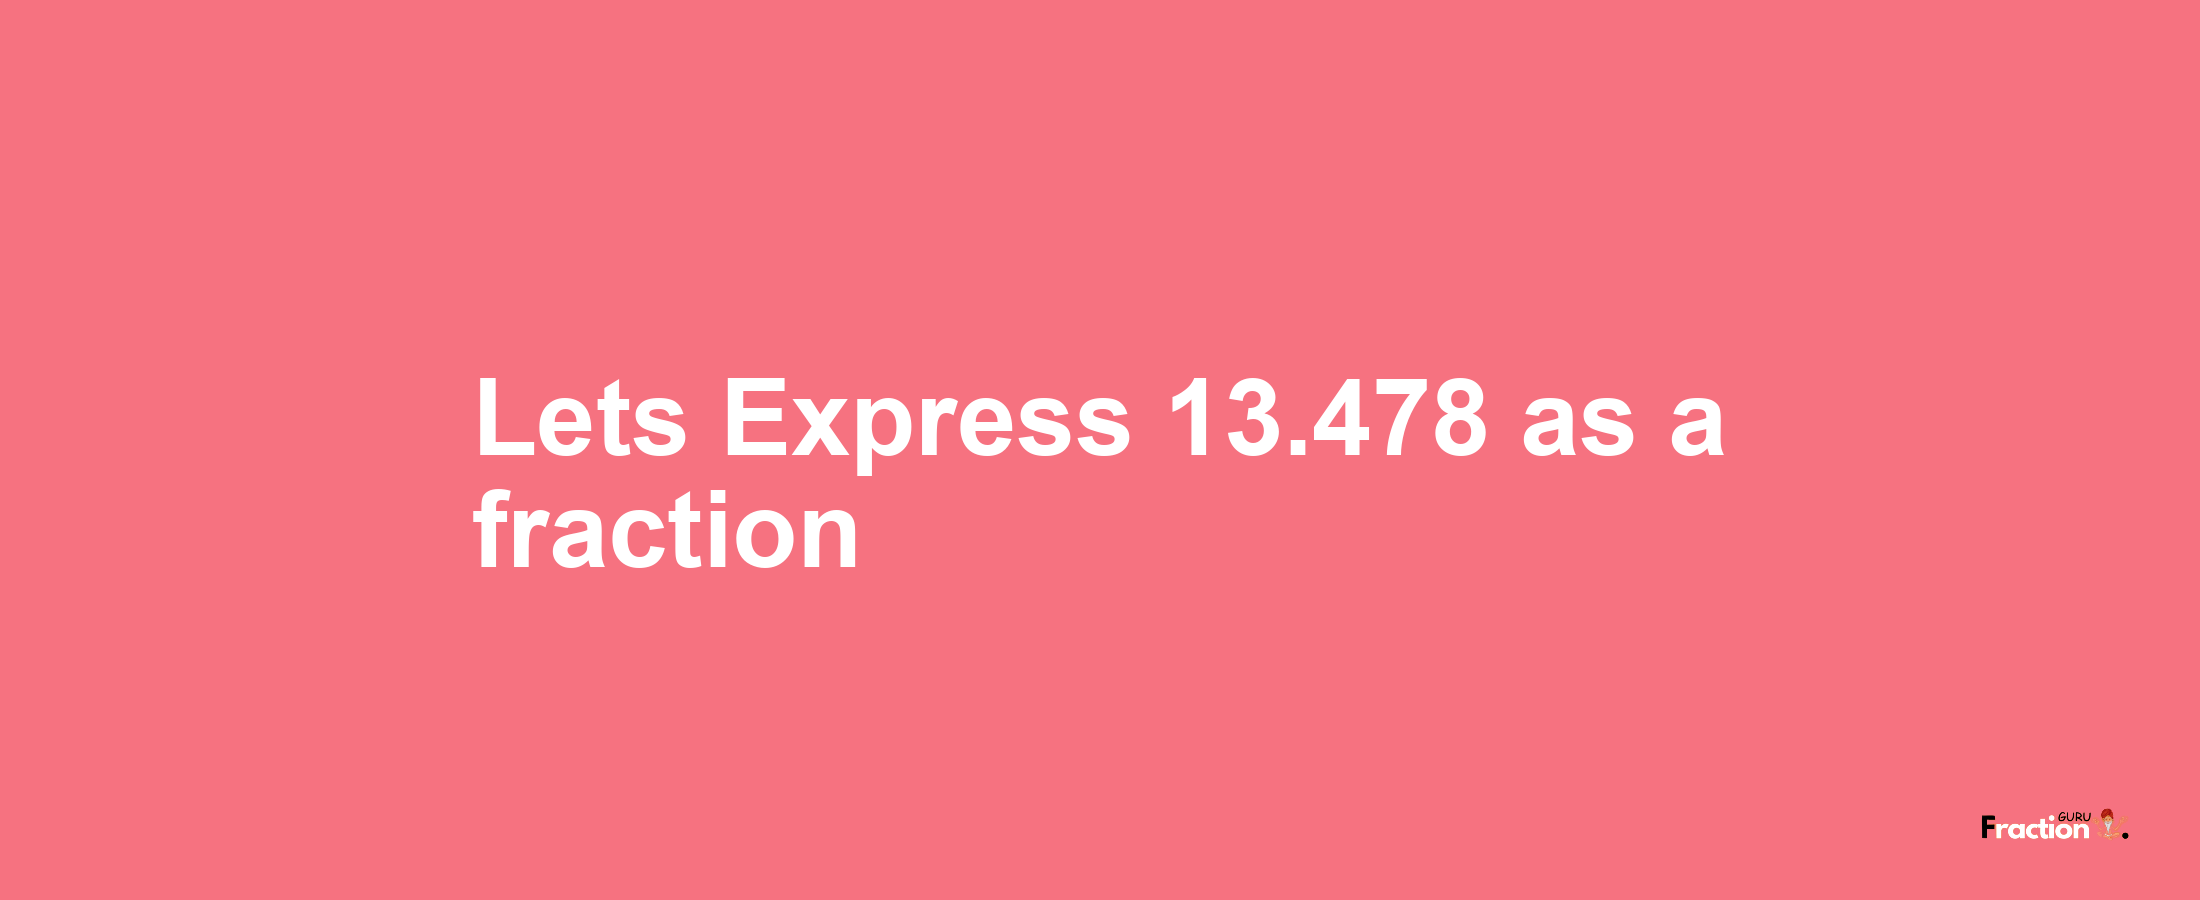 Lets Express 13.478 as afraction